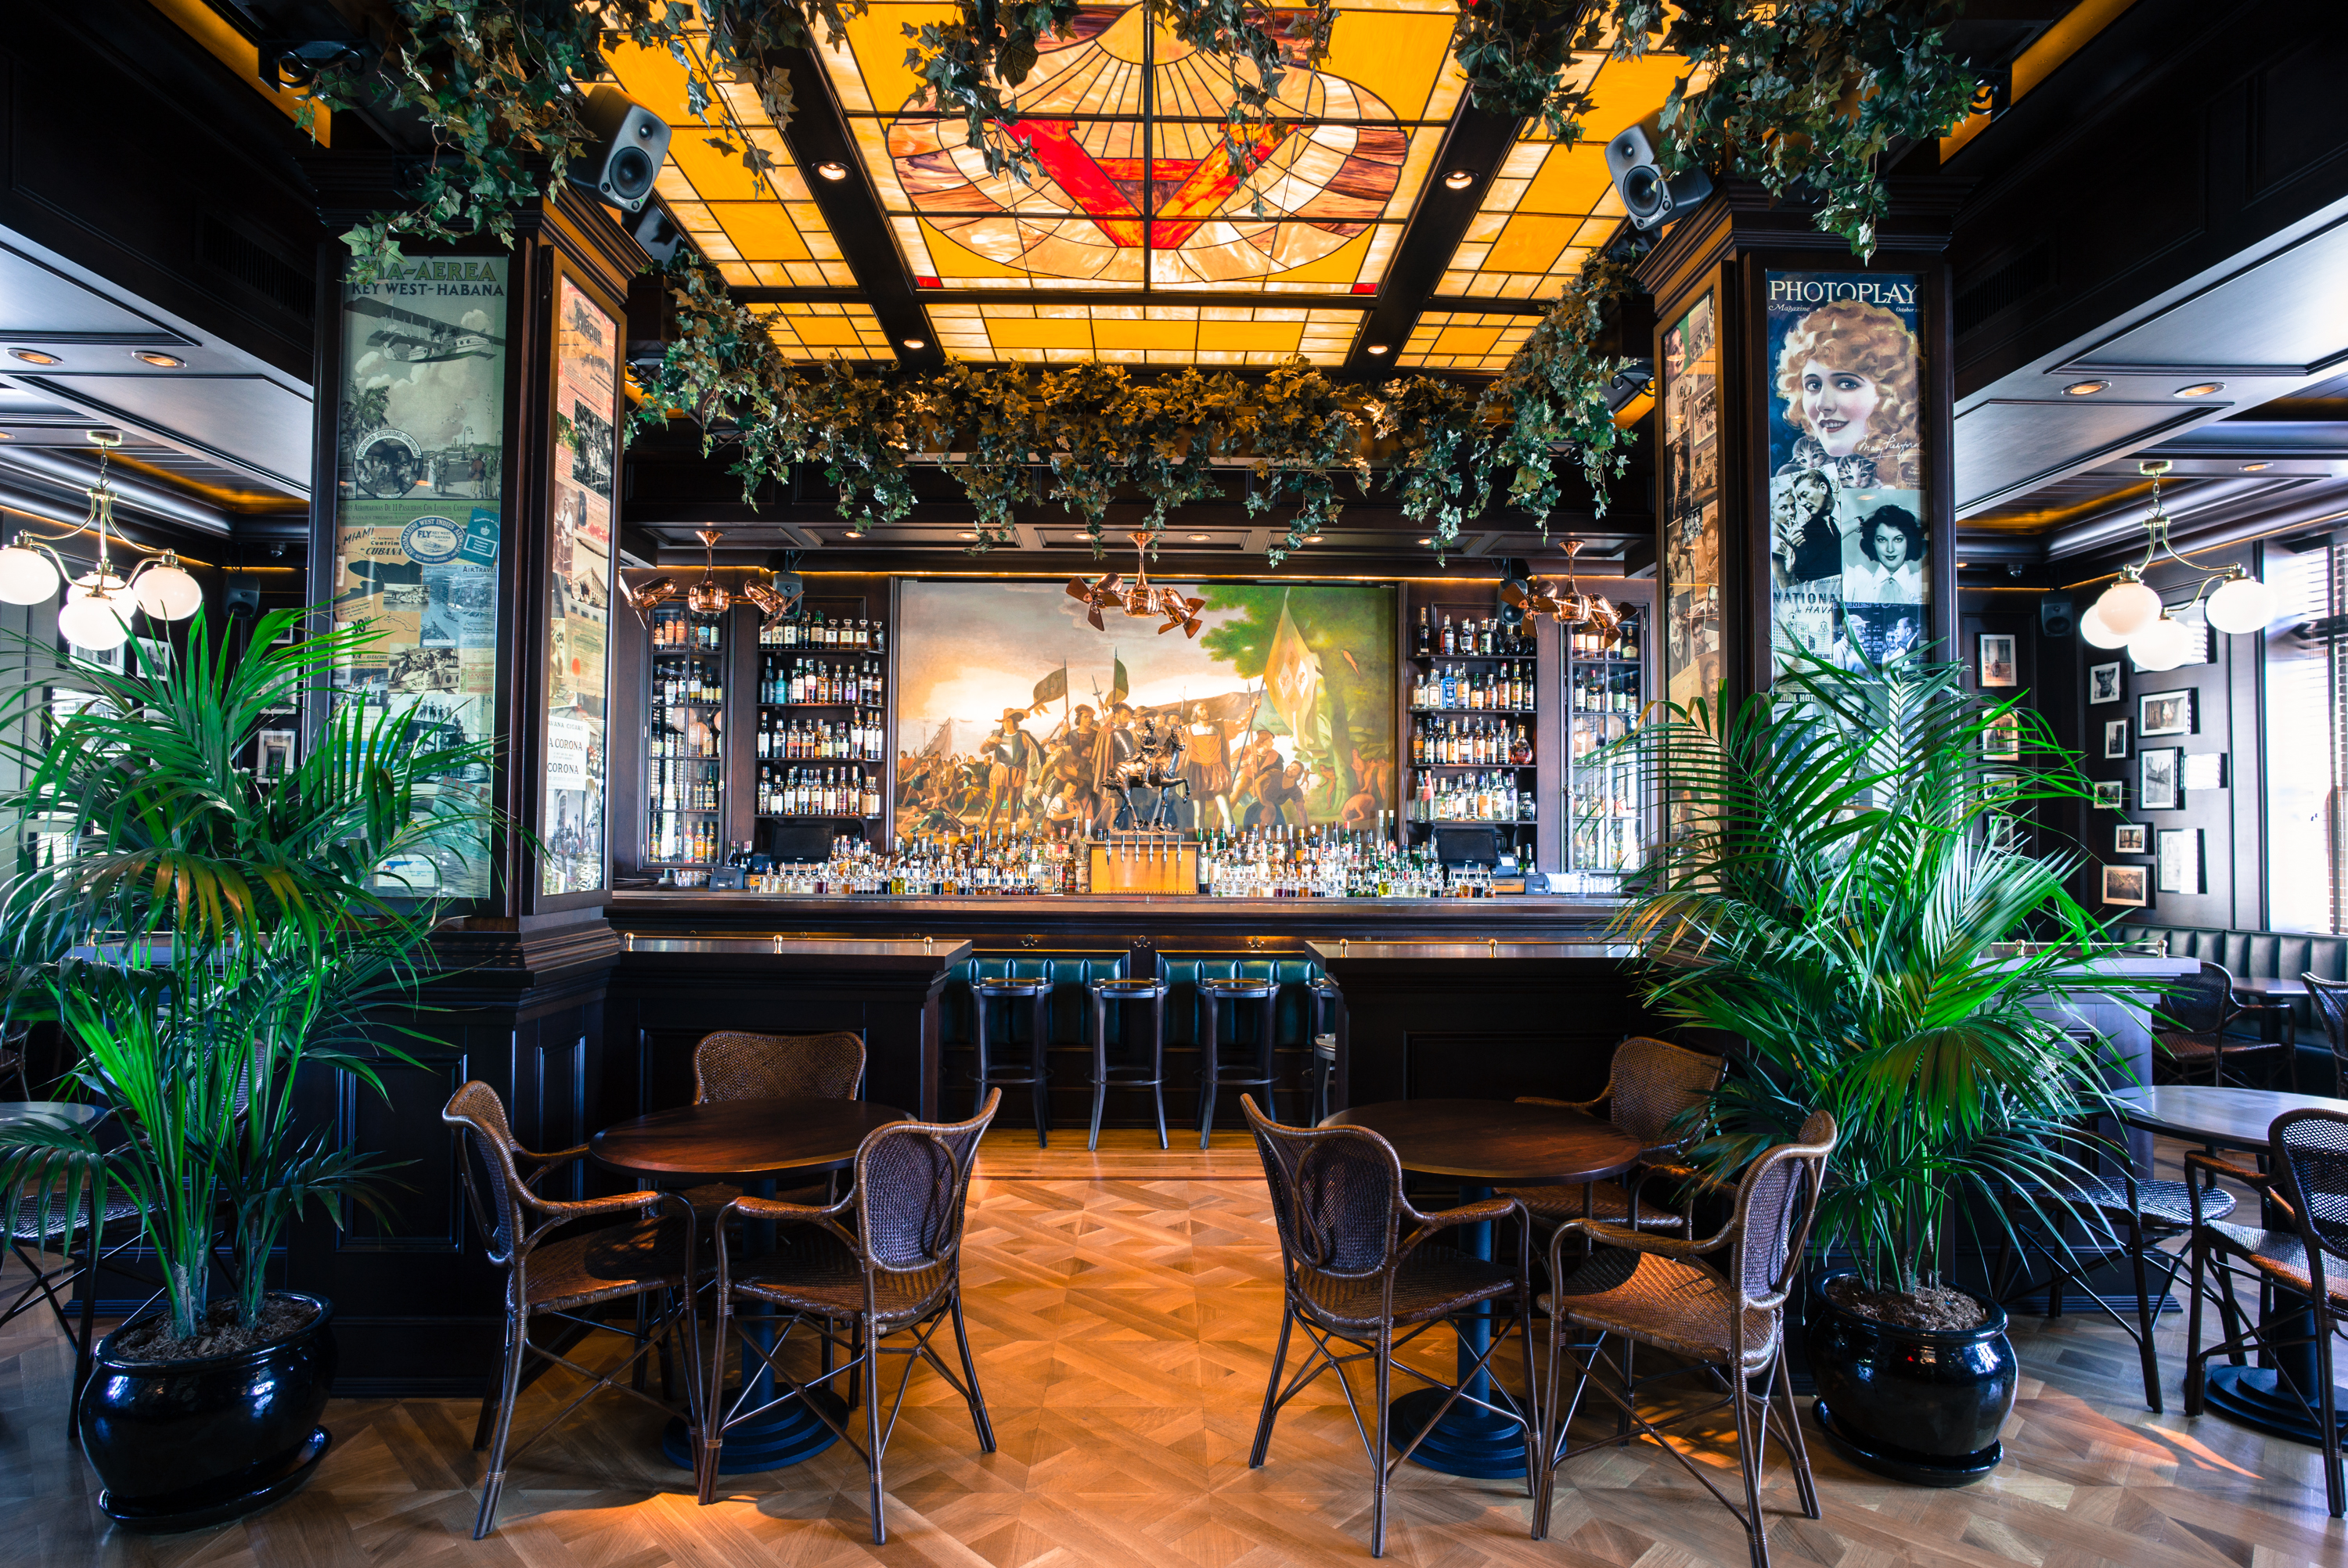 Blacktail’s dark bar, surrounded by two plants and a golden stained glass ceiling